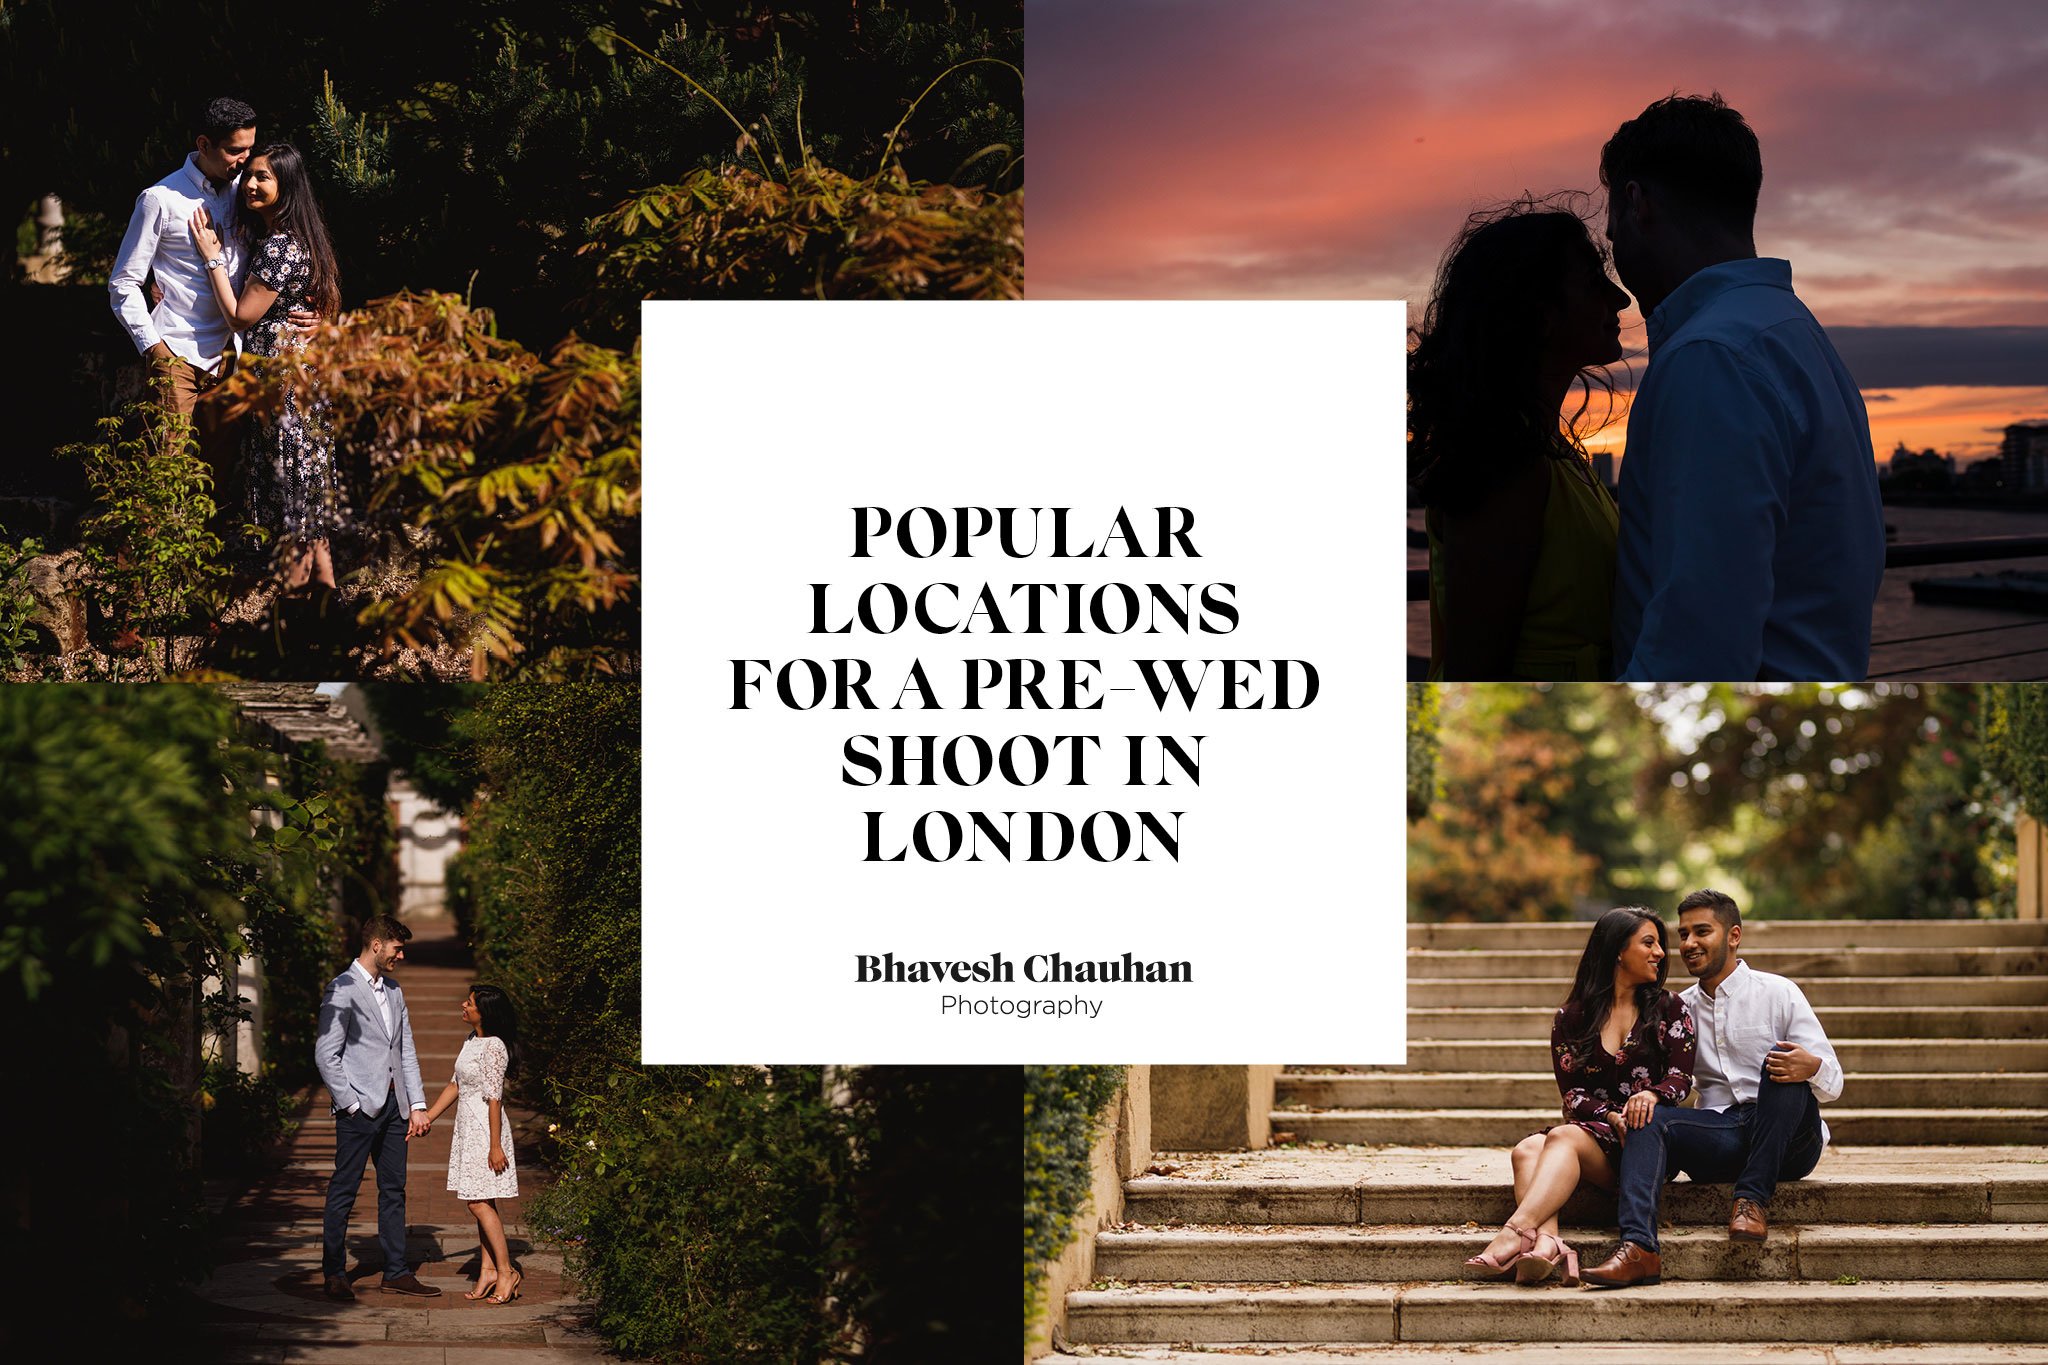 Popular Locations For a Pre-Wed Shoot in London